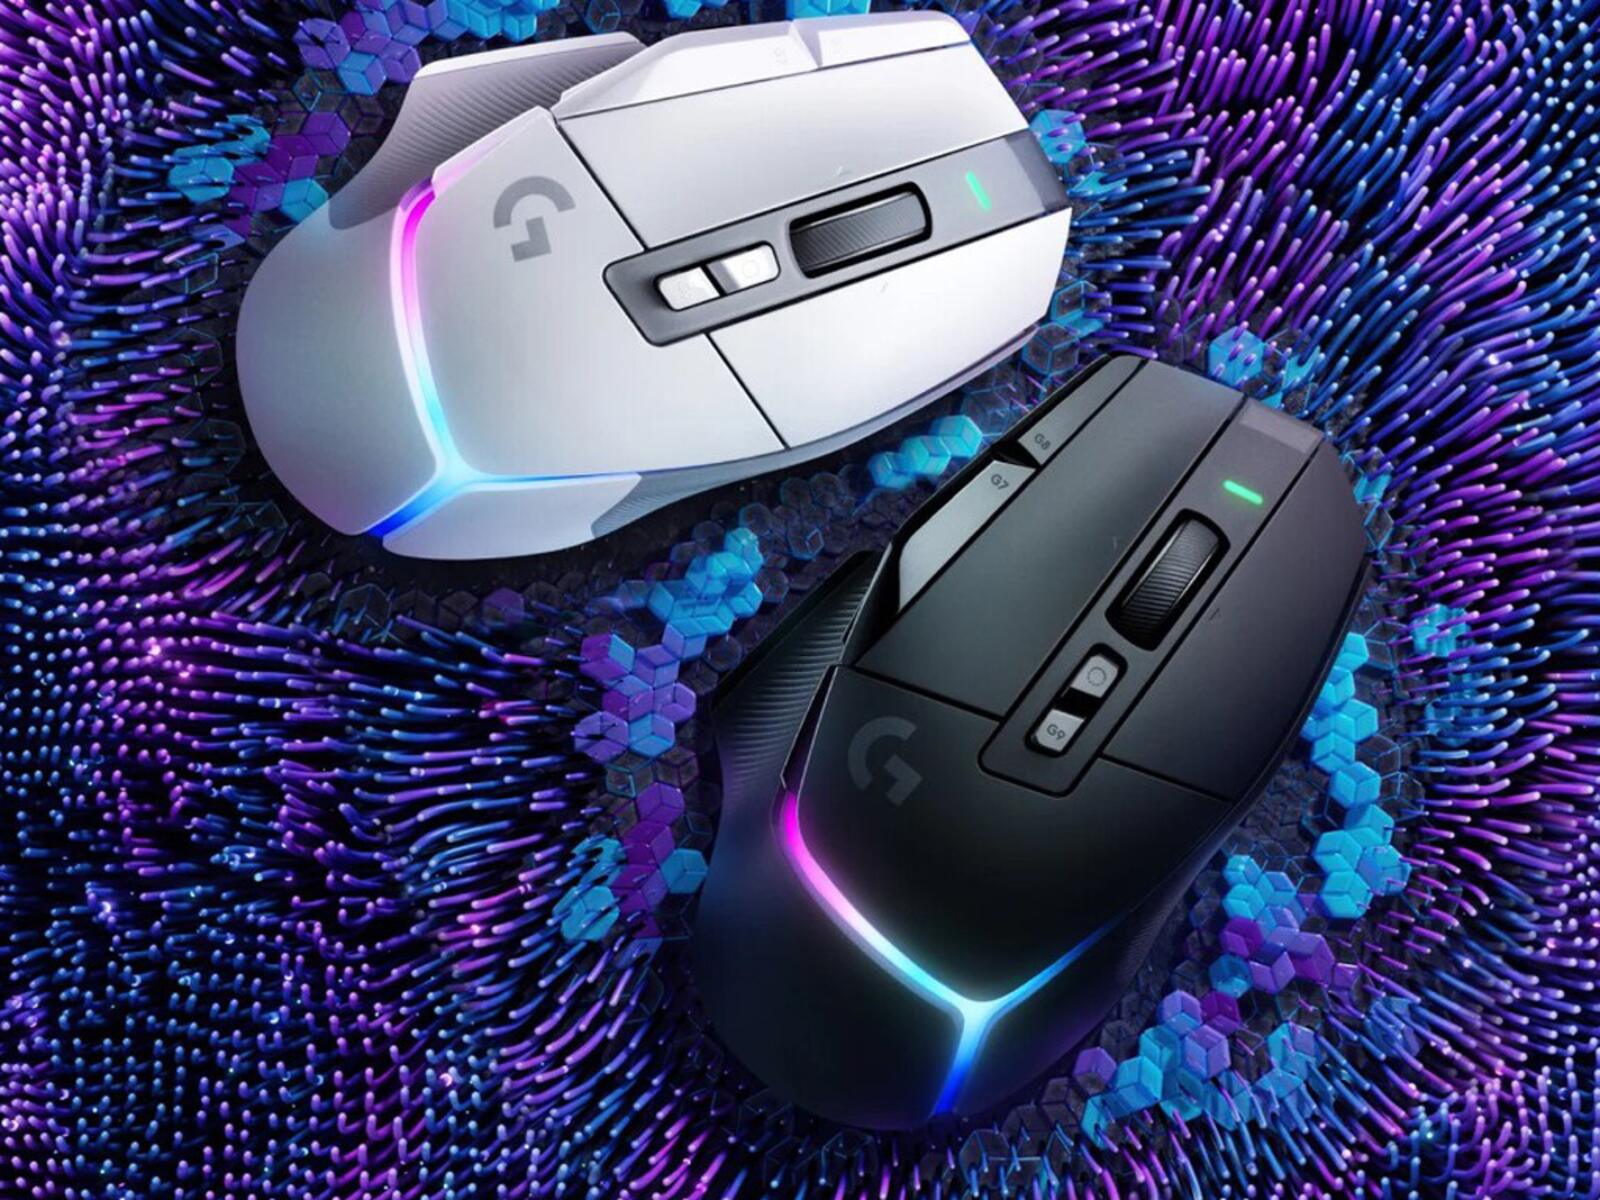 What Gaming Mouse Manufacturers Are Located In The US